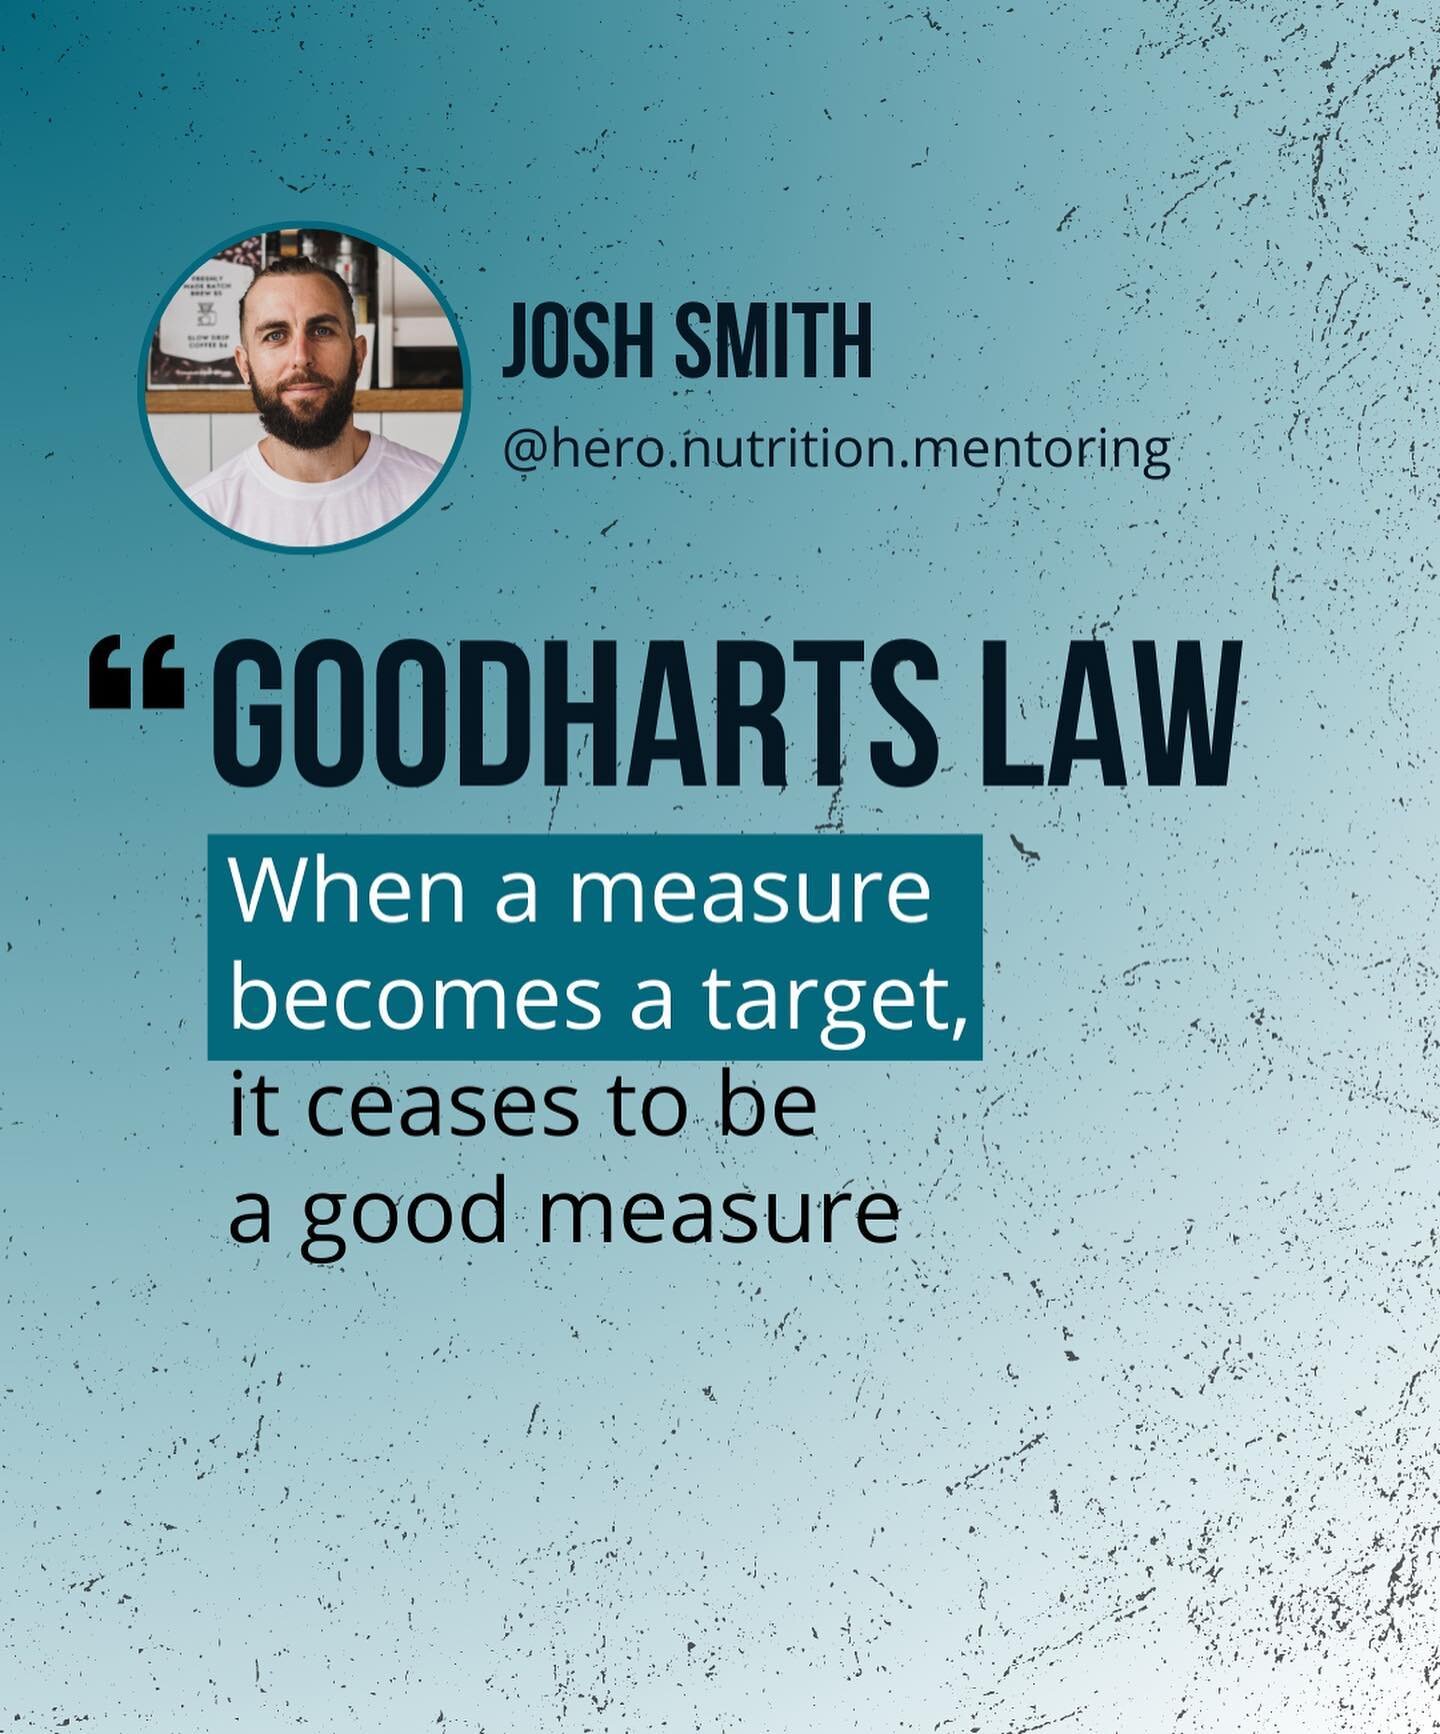 ⚖️ GOODHART'S LAW⁠
⁠
When a measure becomes a target, it ceases to be a good measure.⁠
⁠
It shows up in your clients fairly often.⁠
⁠
They are chasing metrics such as scale weight that aren't aligned with the real reason behind their goals.⁠
⁠
They a